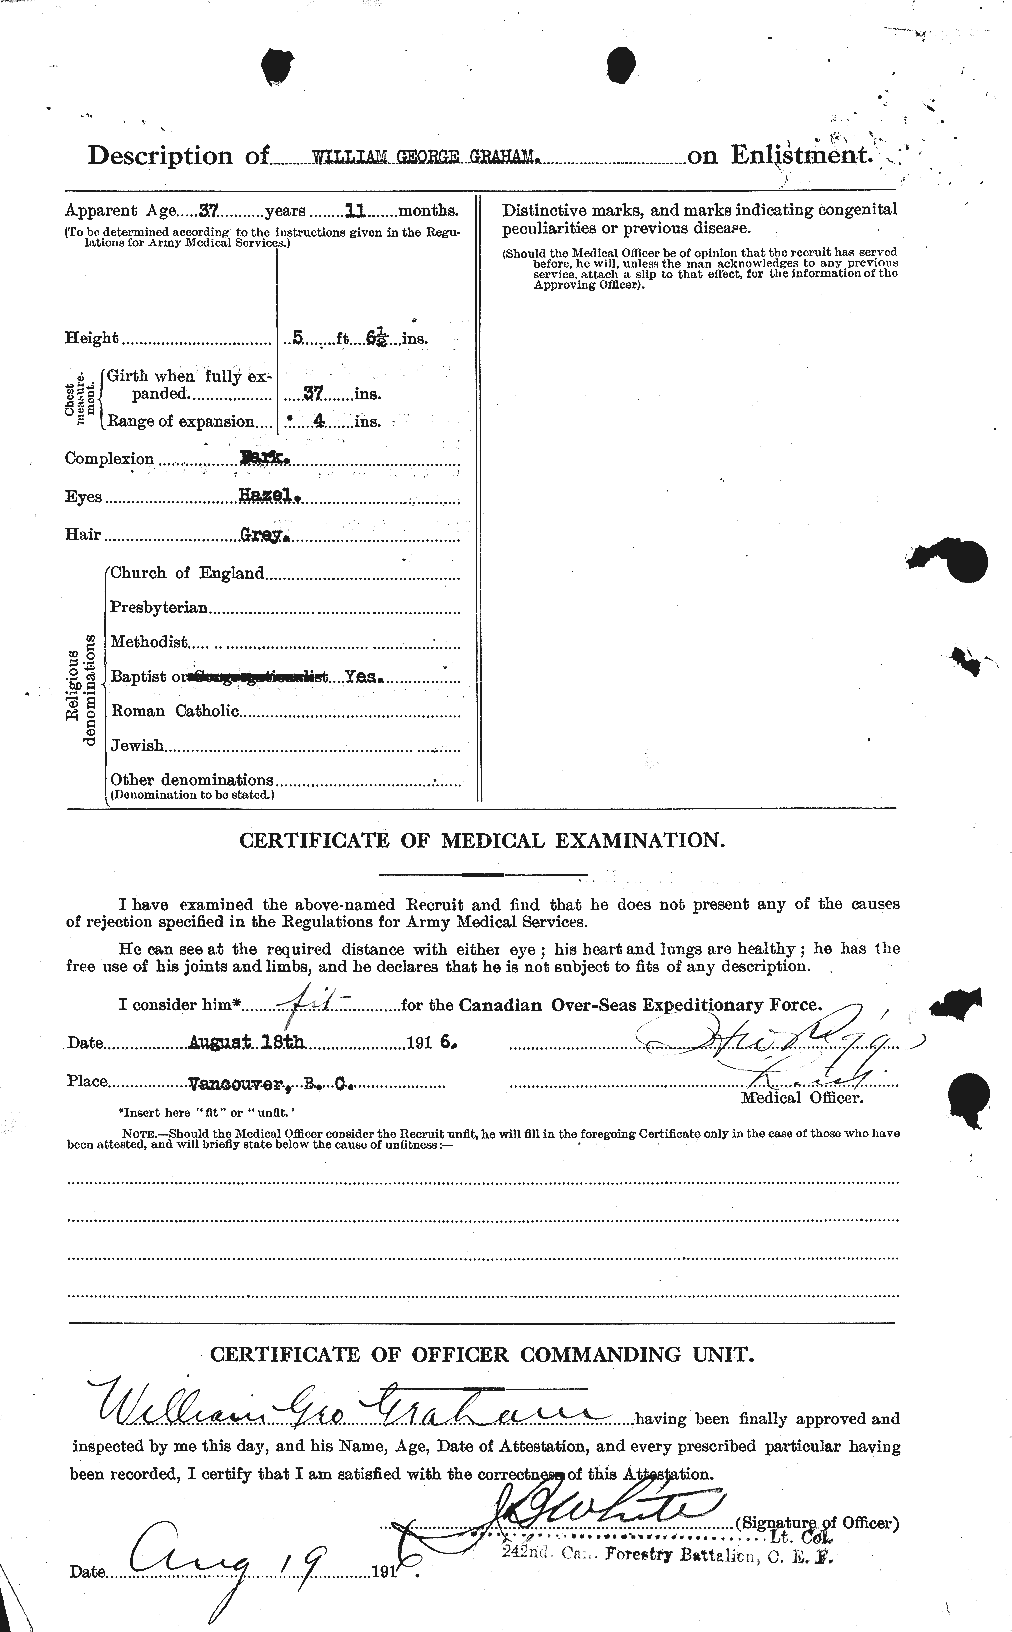 Personnel Records of the First World War - CEF 357998b